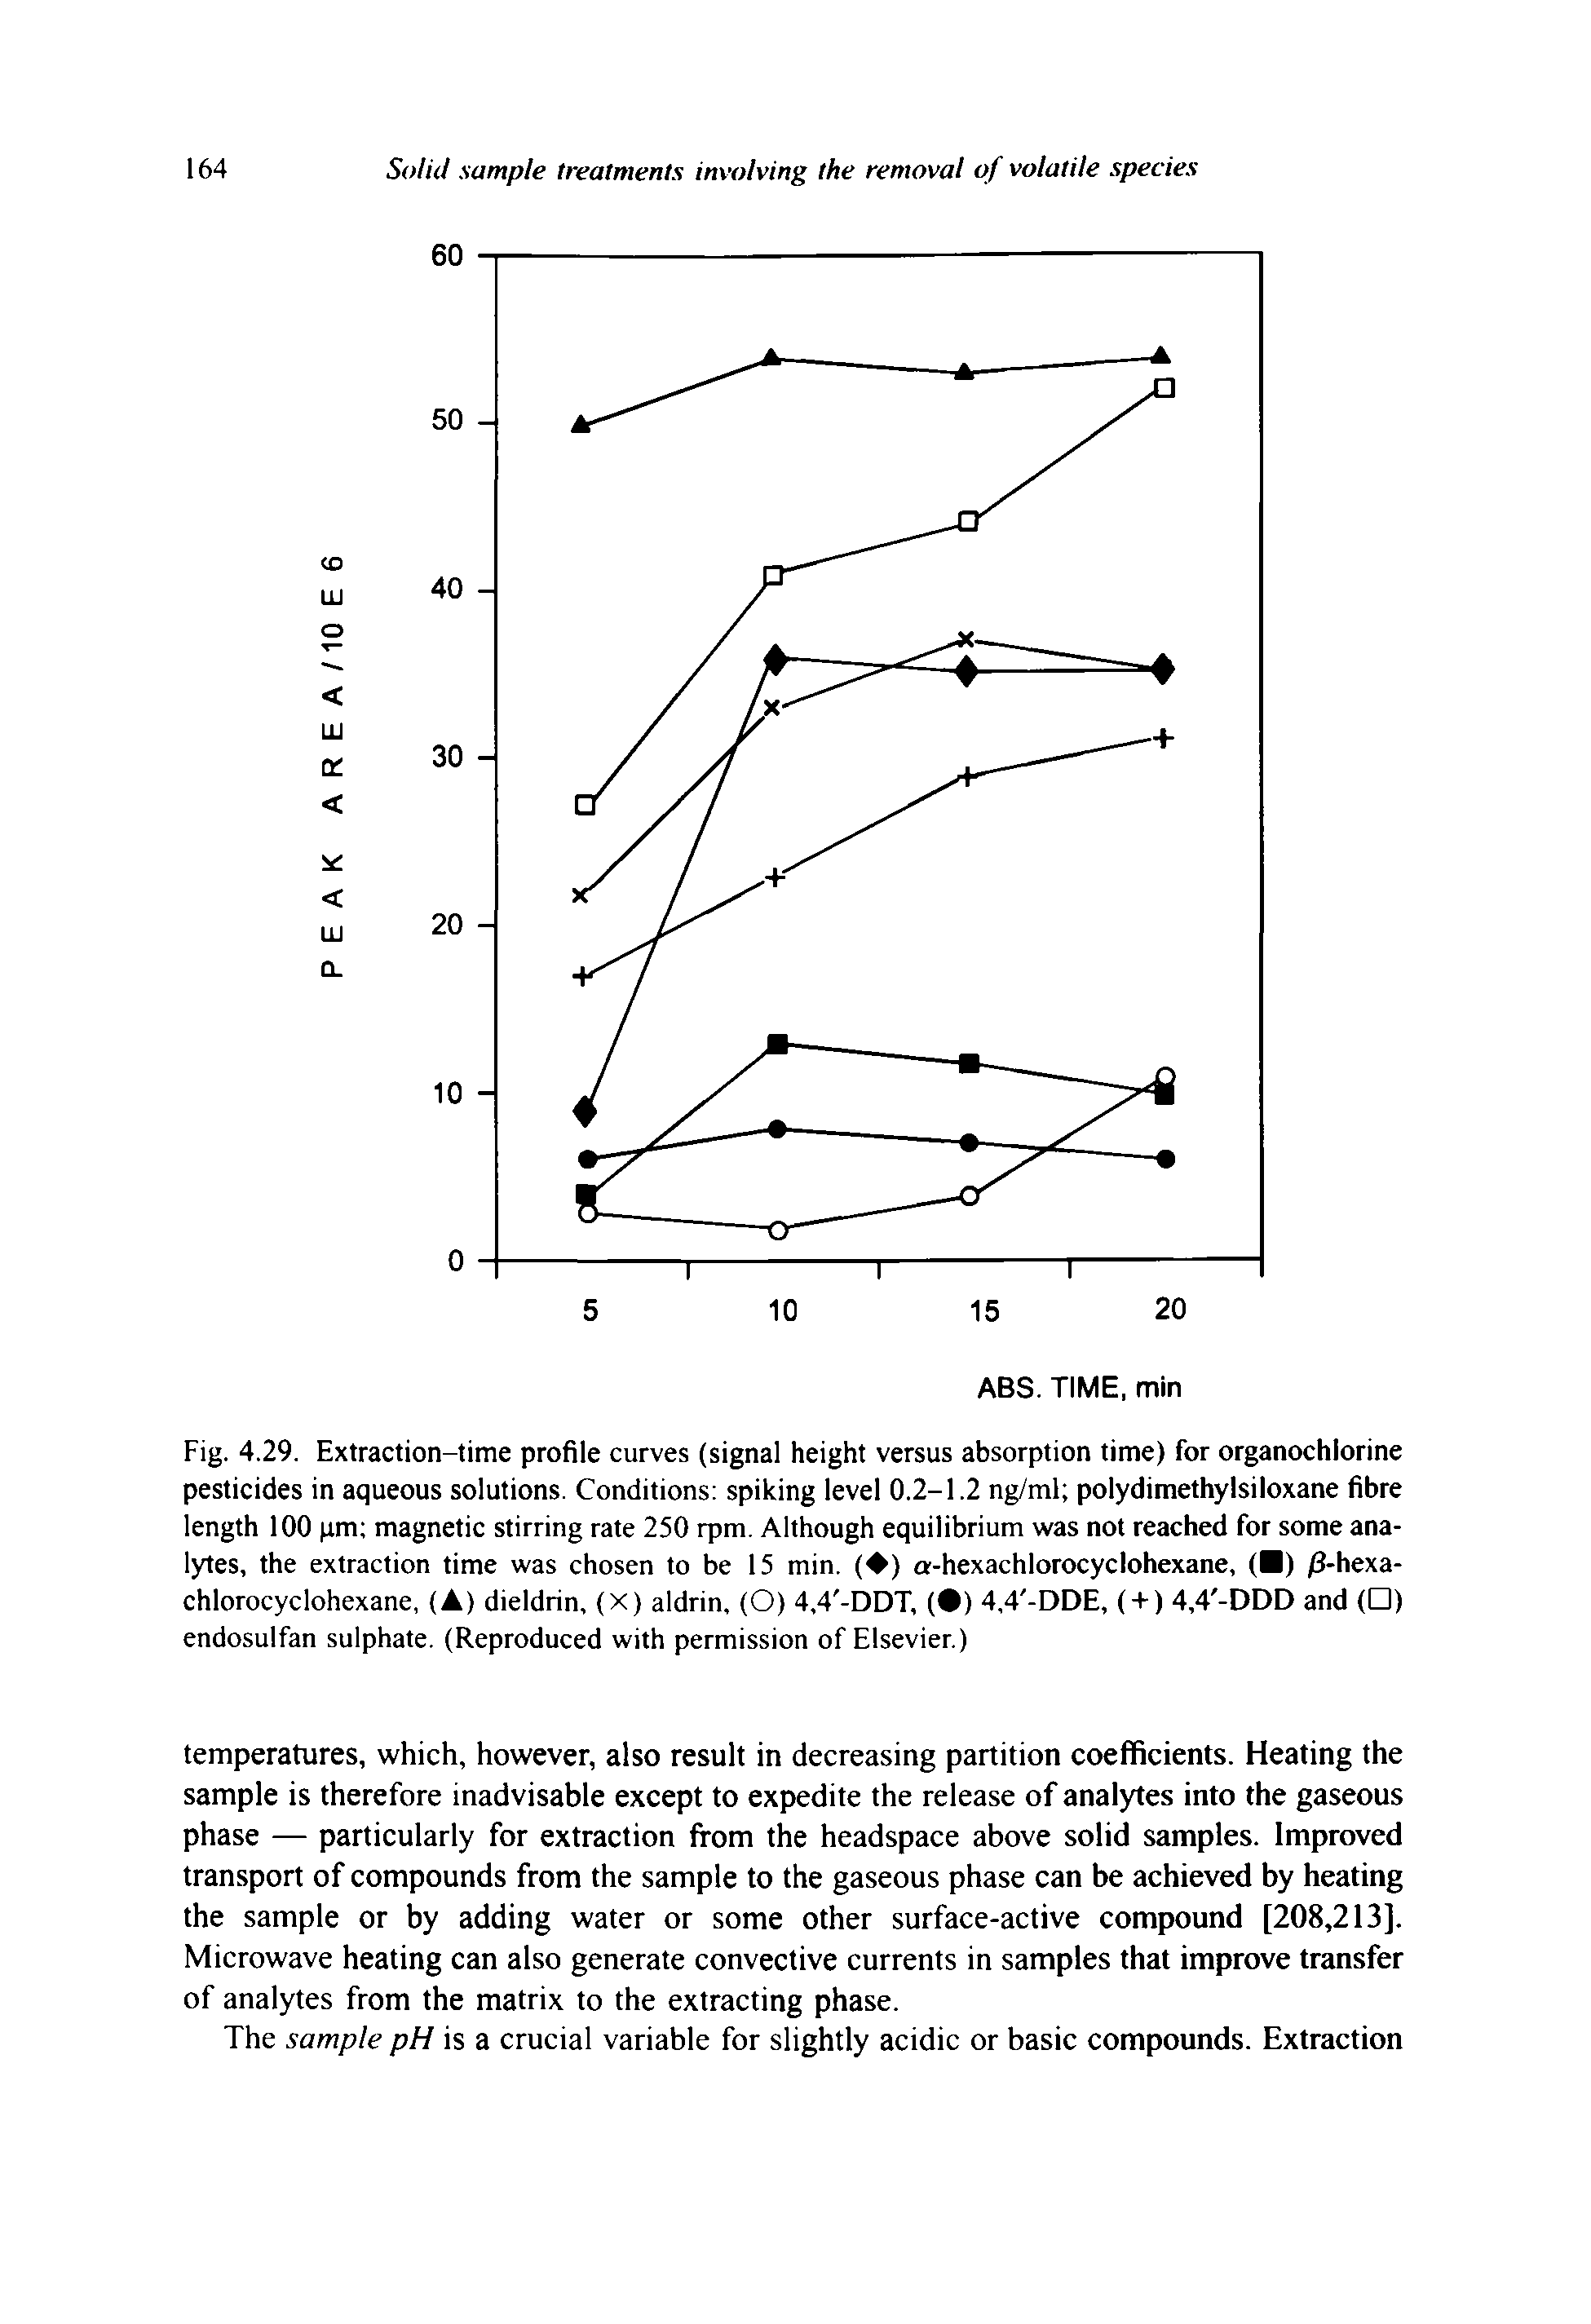 Fig. 4.29. Extraction-time profile curves (signal height versus absorption time) for organochlorine pesticides in aqueous solutions. Conditions spiking level 0.2-1.2 ng/ml polydimethylsiloxane fibre length 100 pm magnetic stirring rate 250 rpm. Although equilibrium was not reached for some analytes, the extraction time was chosen to be 15 min. ( ) a-hexachlorocyclohexane, ( ) /3-hexa-chlorocyclohexane, (A) dieldrin, (x) aldrin, (O) 4,4 -DDT, ( ) 4,4 -DDE, ( + ) 4,4 -DDD and ( ) endosulfan sulphate. (Reproduced with permission of Elsevier.)...